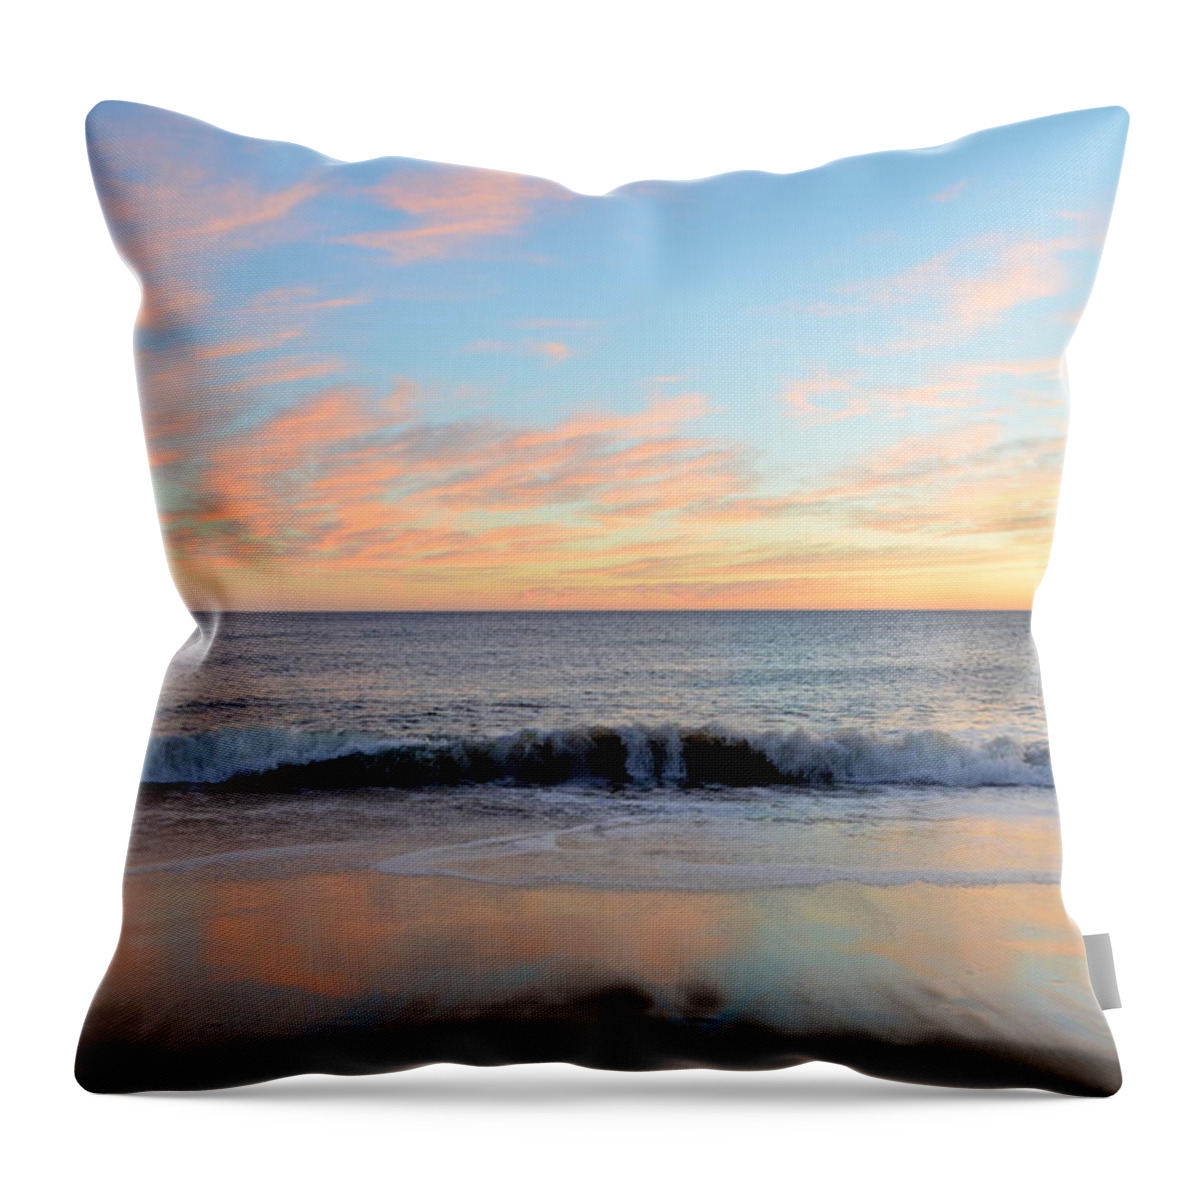 Obx Sunrise Throw Pillow featuring the photograph 1/6/19 OBX Sunrise by Barbara Ann Bell